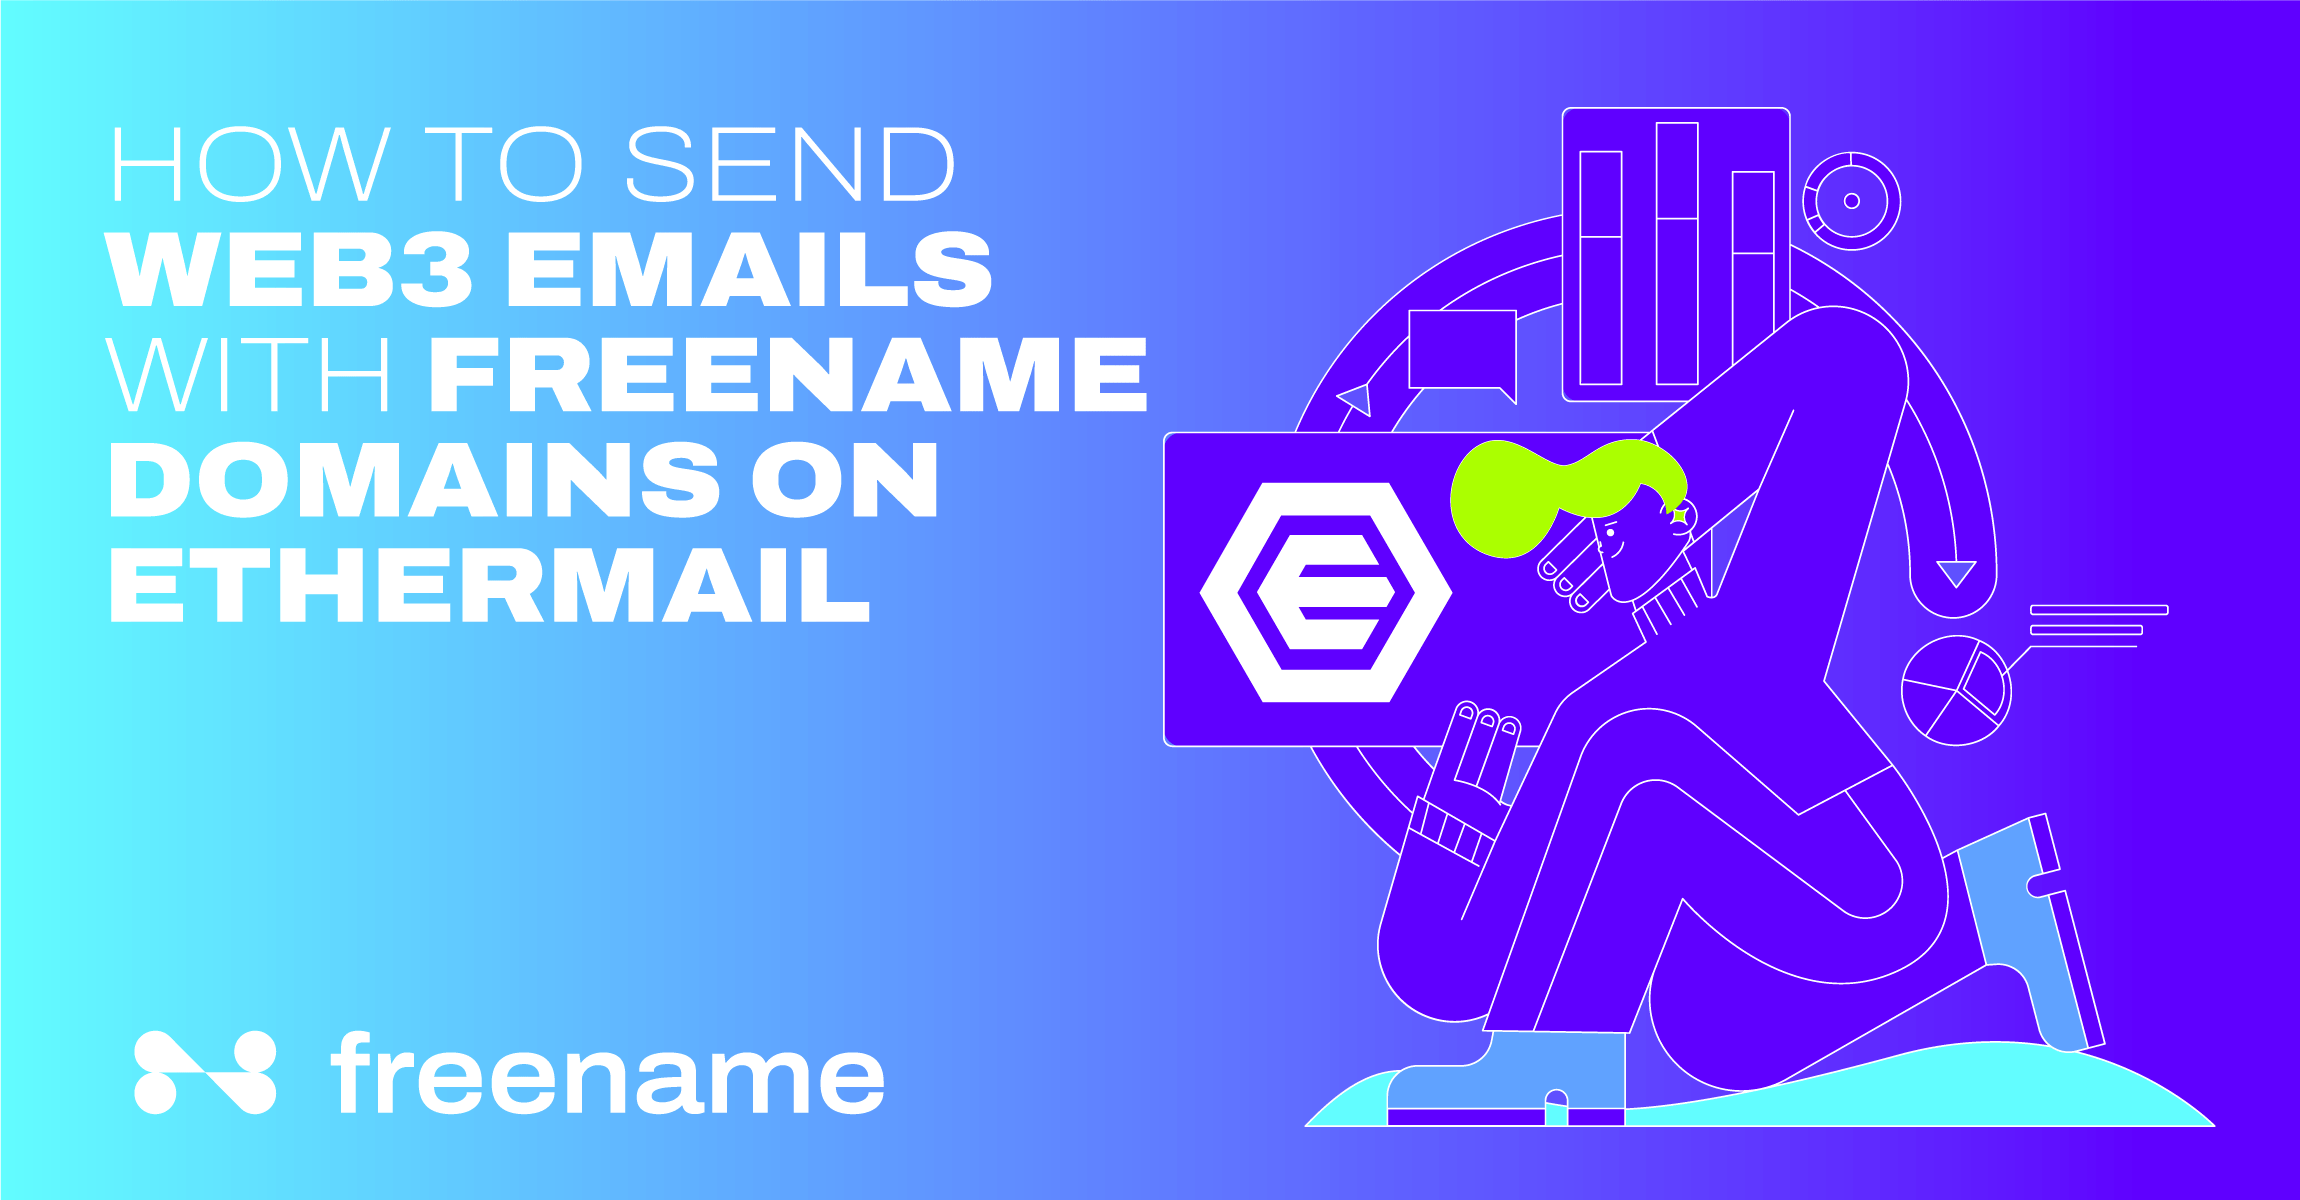 How to Send Web3 Emails with Freename Domains on Ethermail